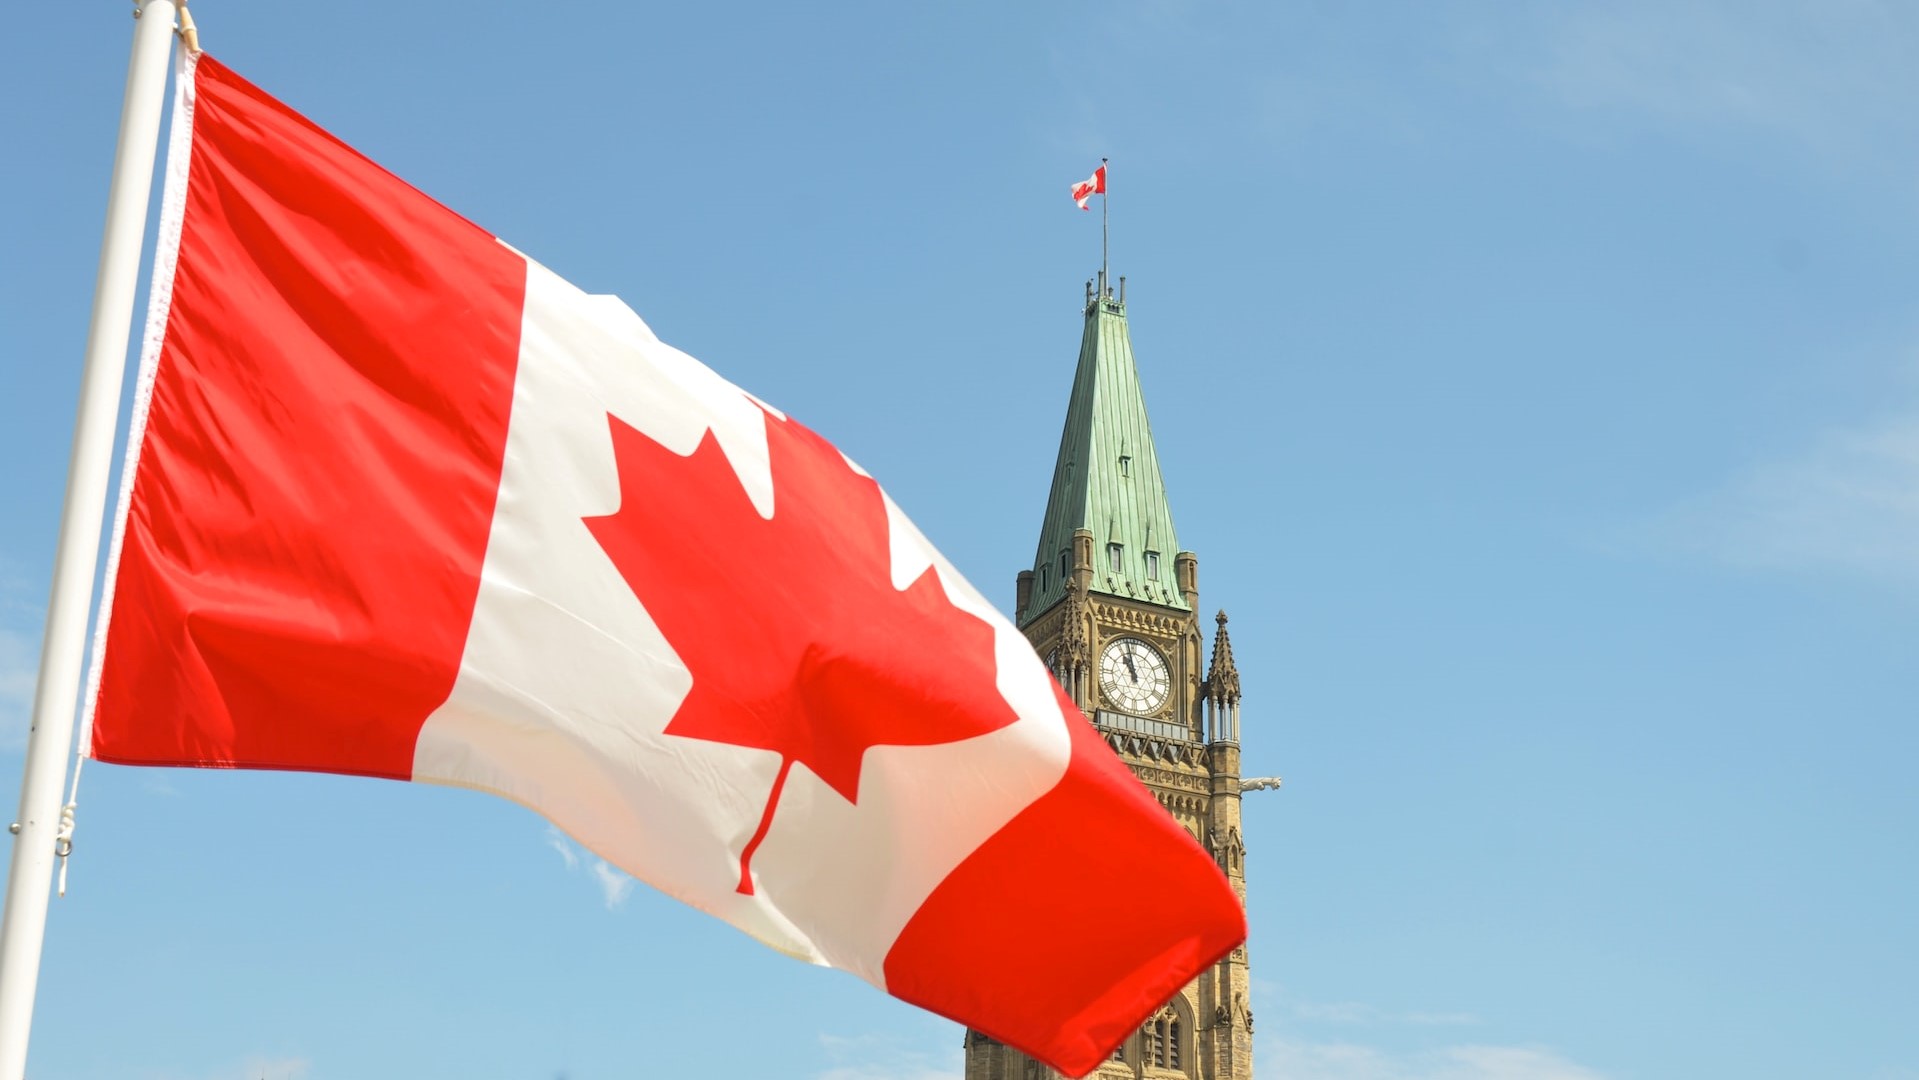 The Canadian flag displayed in front of a tower.